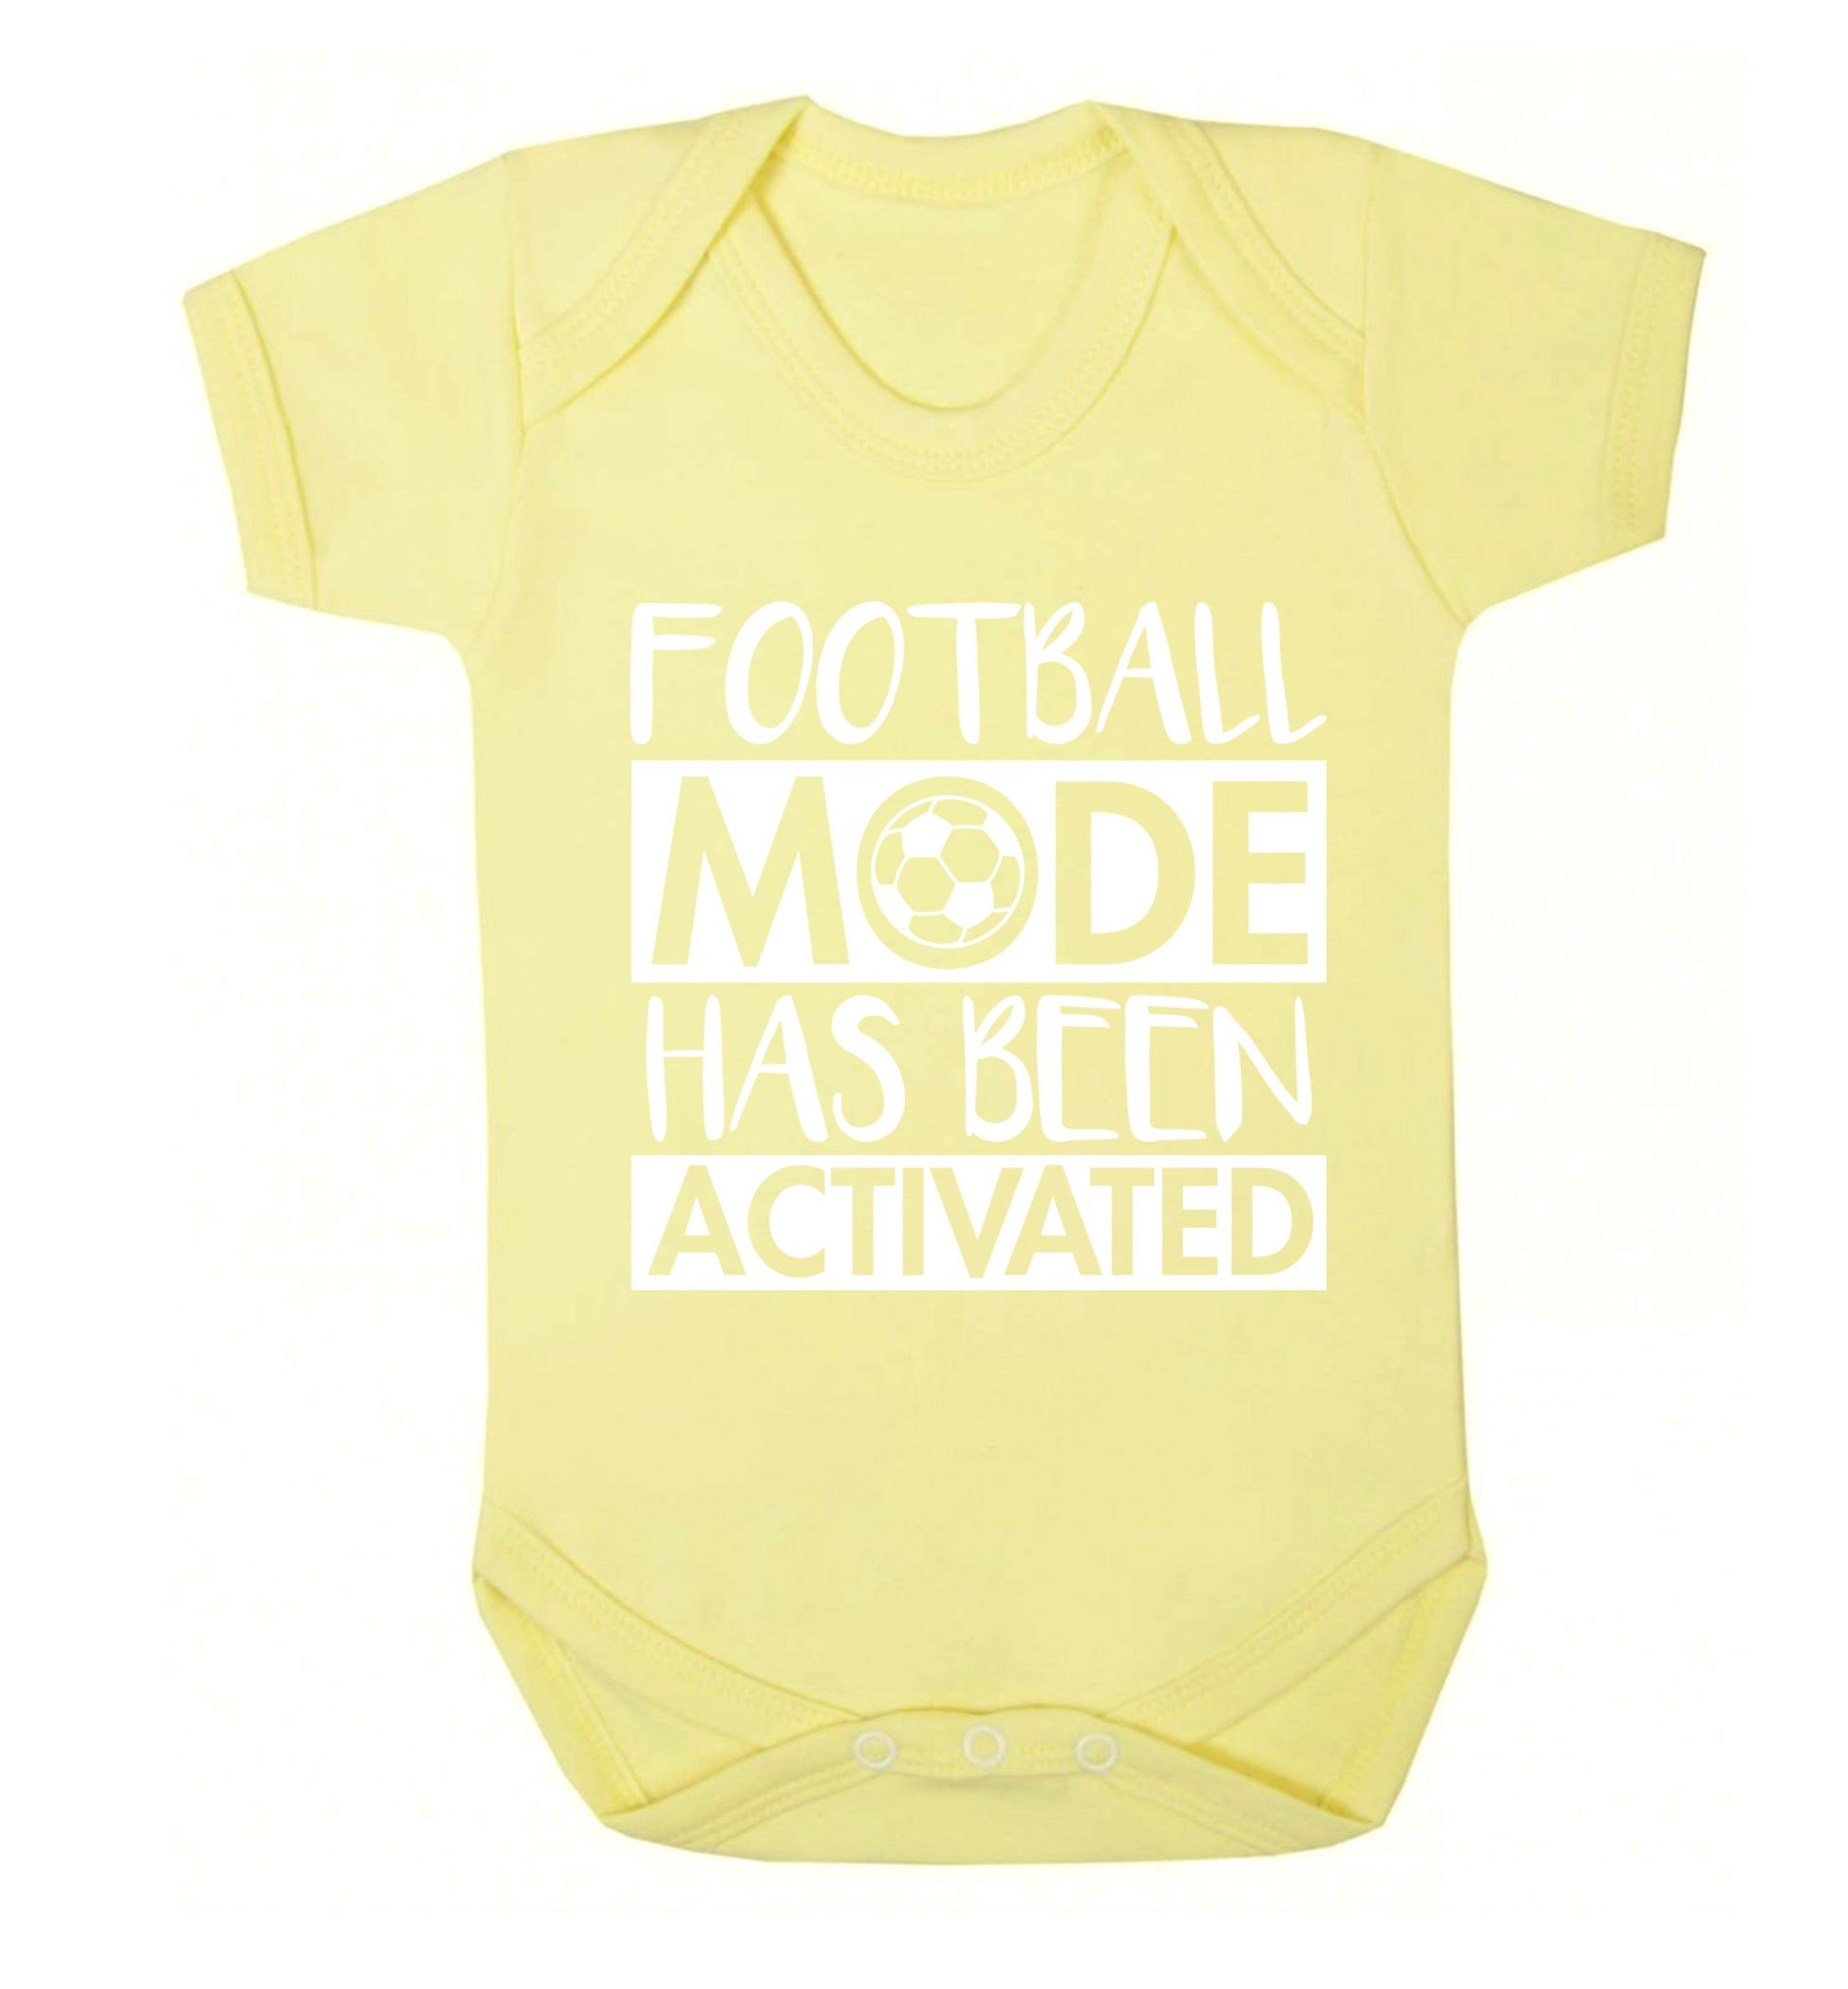 Football mode has been activated Baby Vest pale yellow 18-24 months